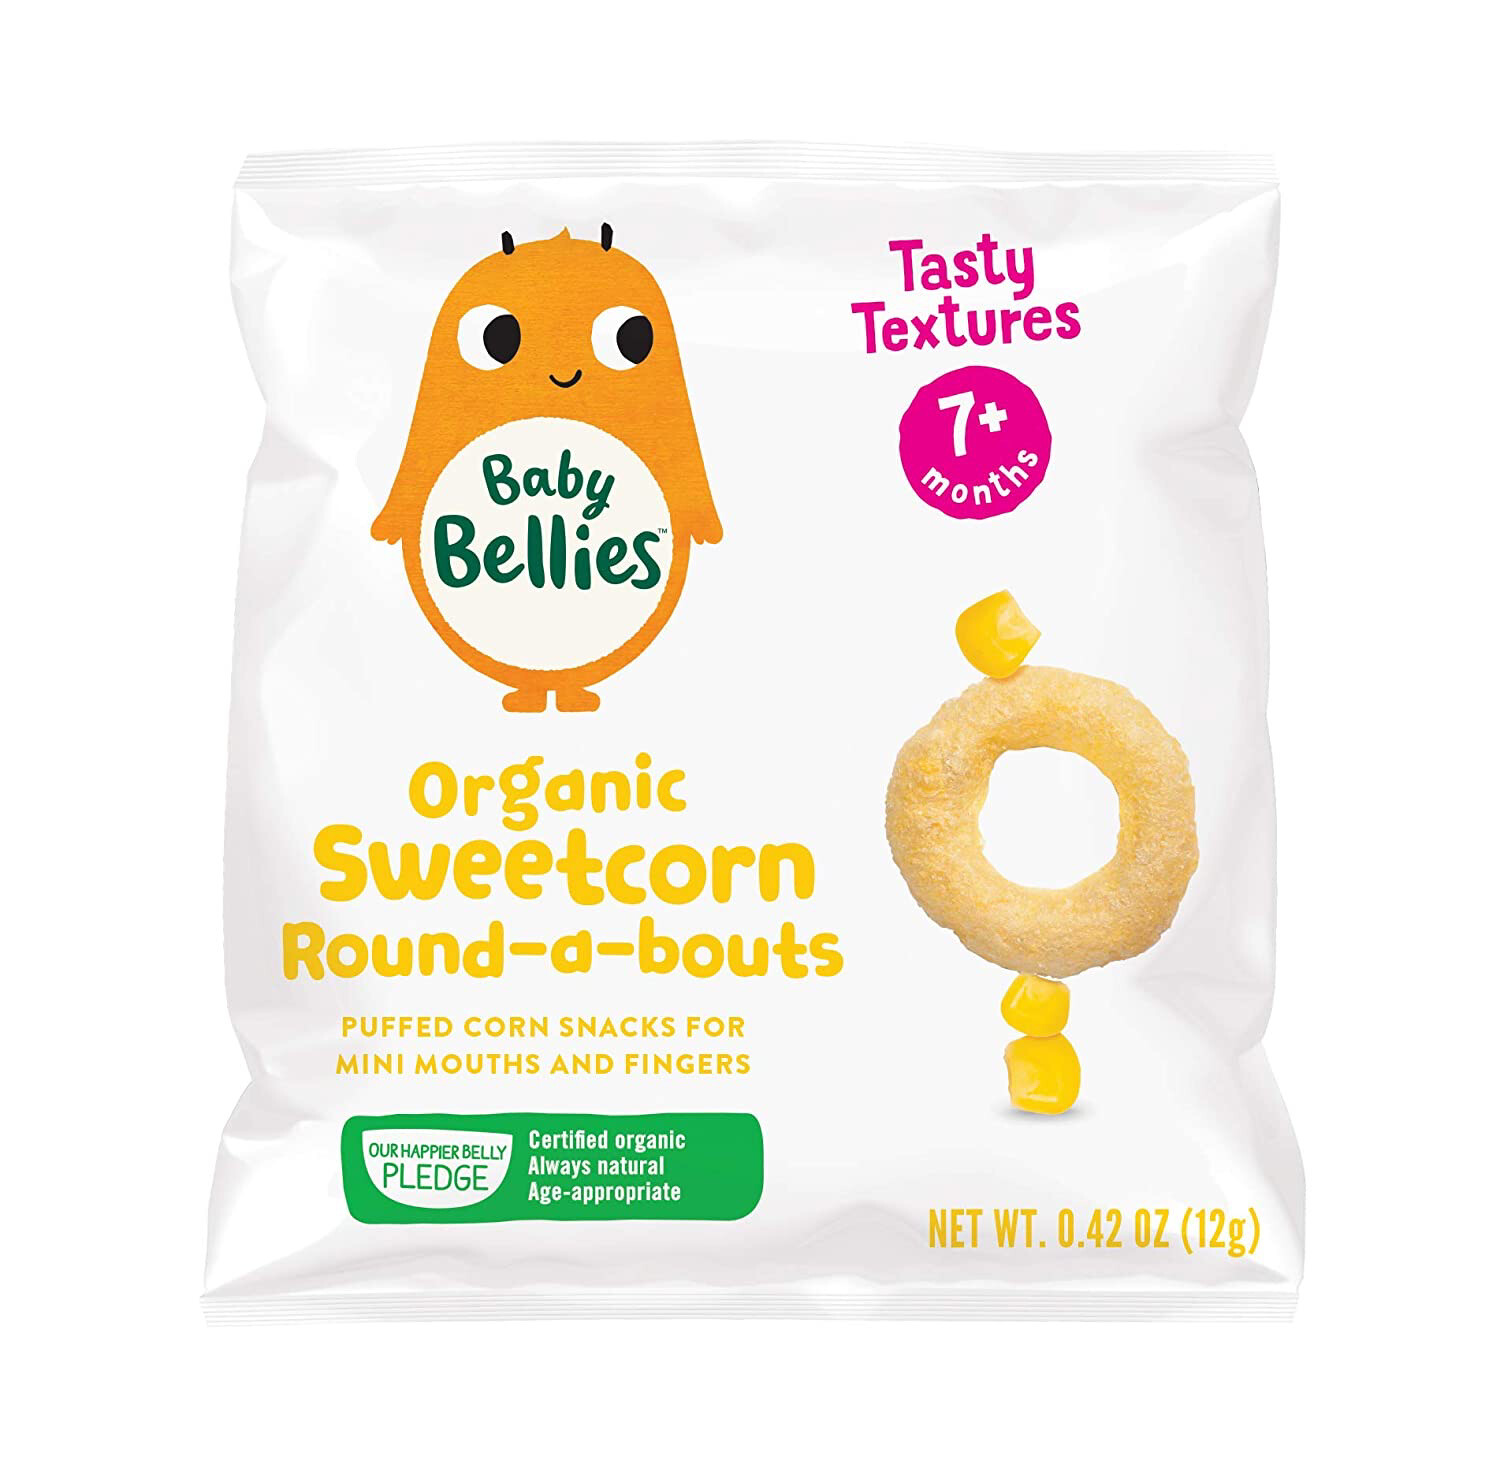 Baby Bellies Organic Sweetcorn Round-a-bouts Puffed Corn Snacks for Fearless Fingers